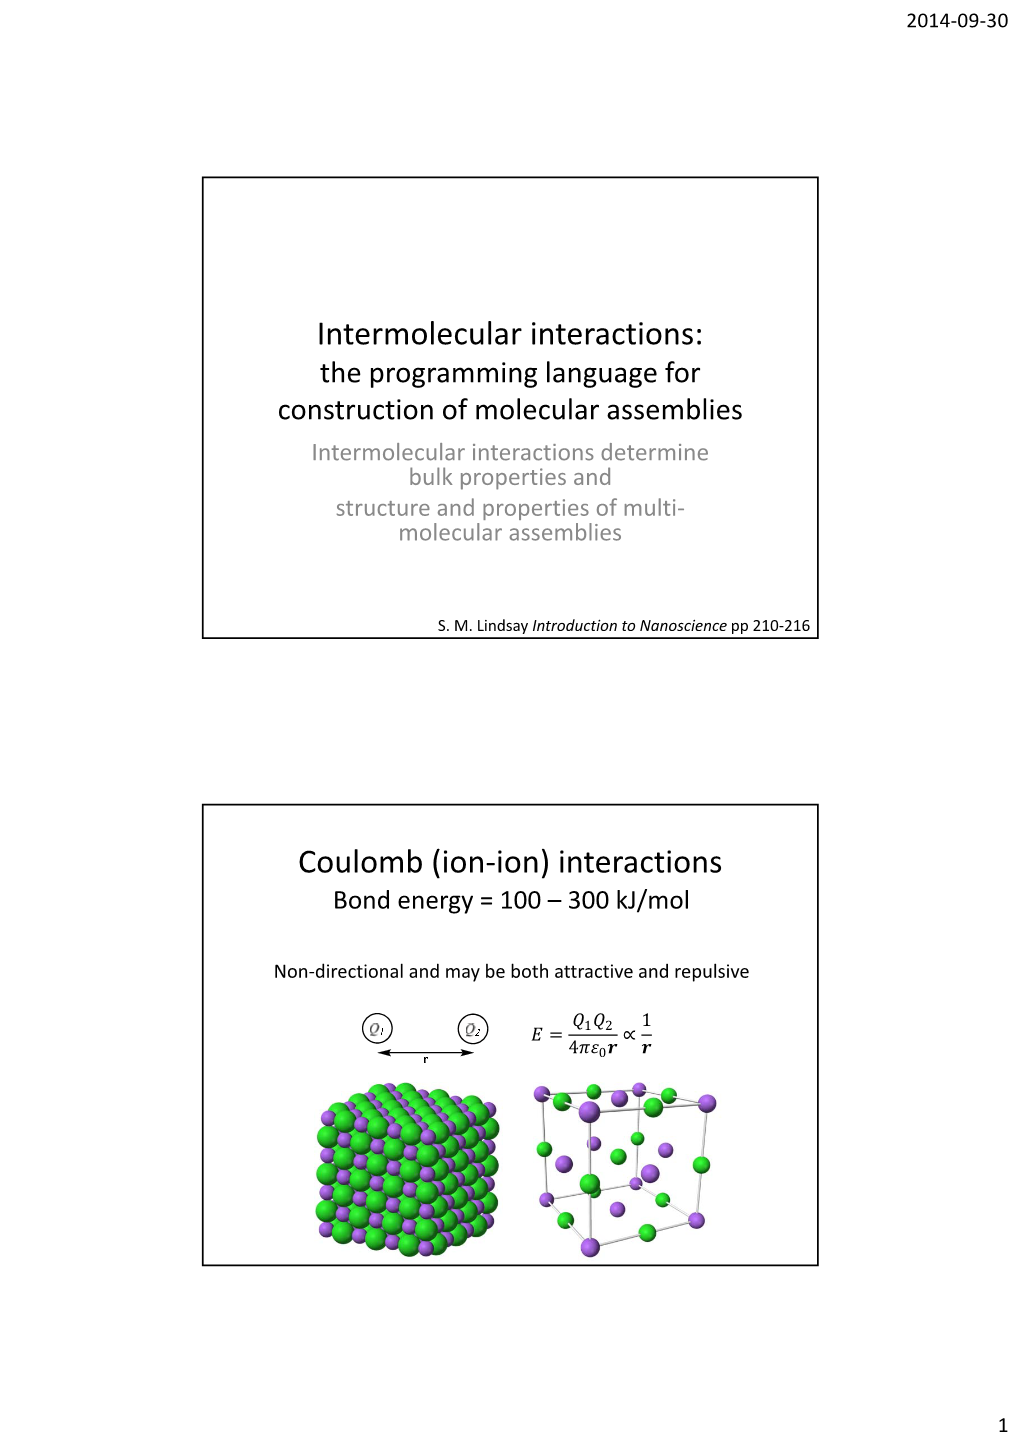 Intermolecular Interactions: Coulomb (Ion-Ion) Interactions